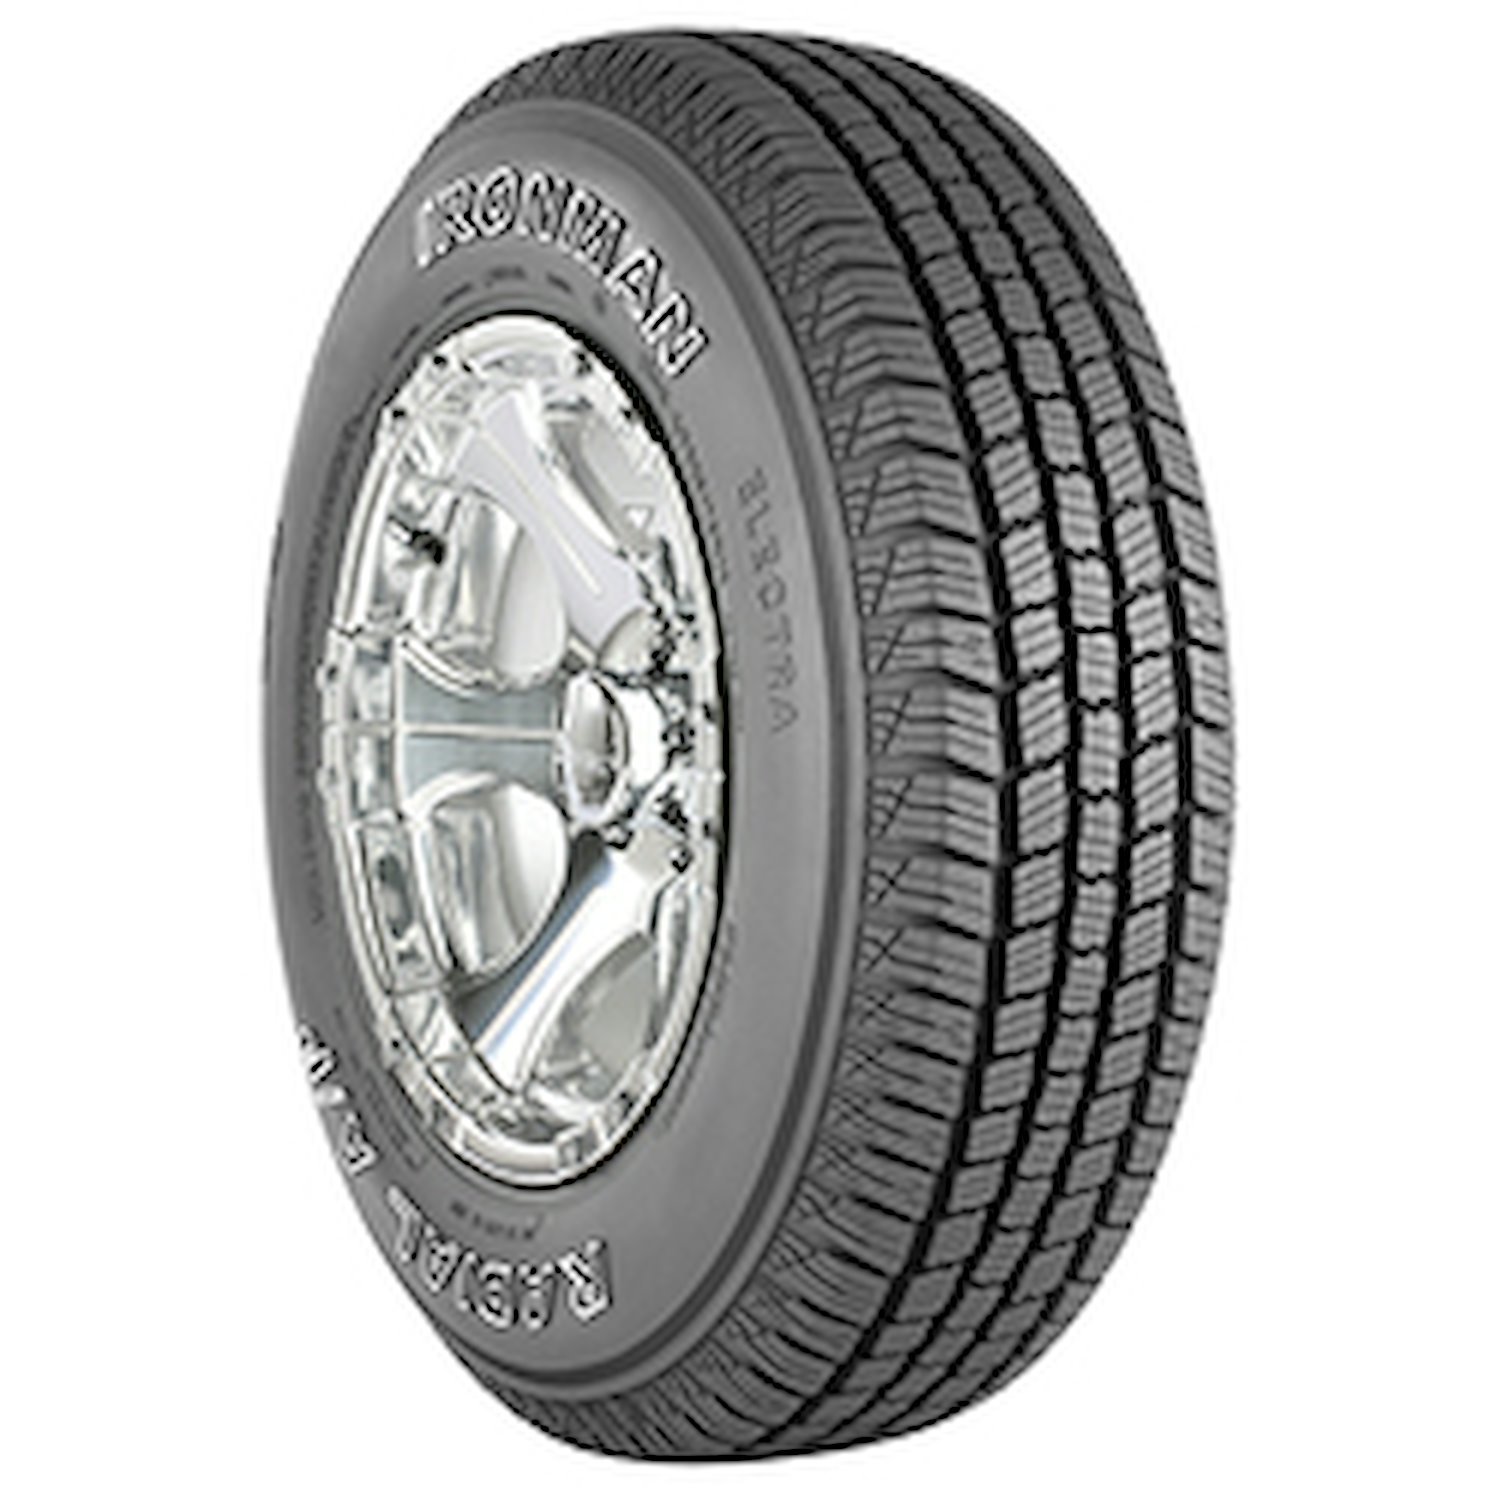 Radial A/P Tire, 245/70R17 110T